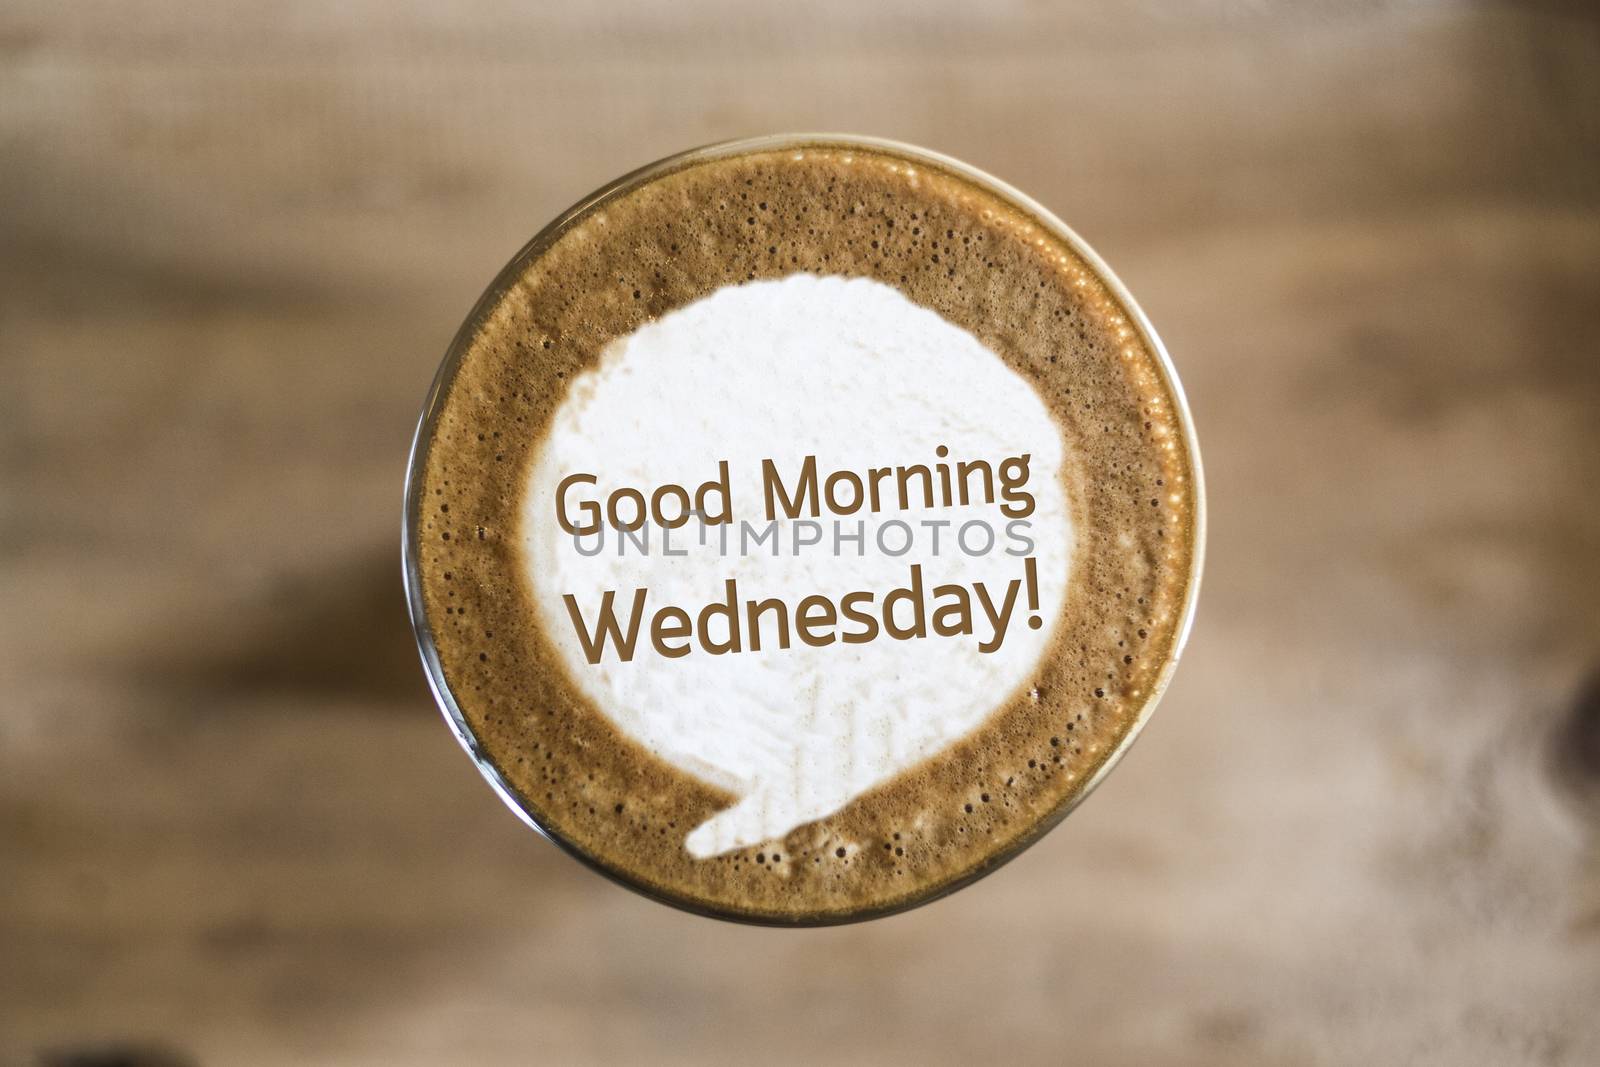 Good Morning Wednesday on Coffee latte art concept